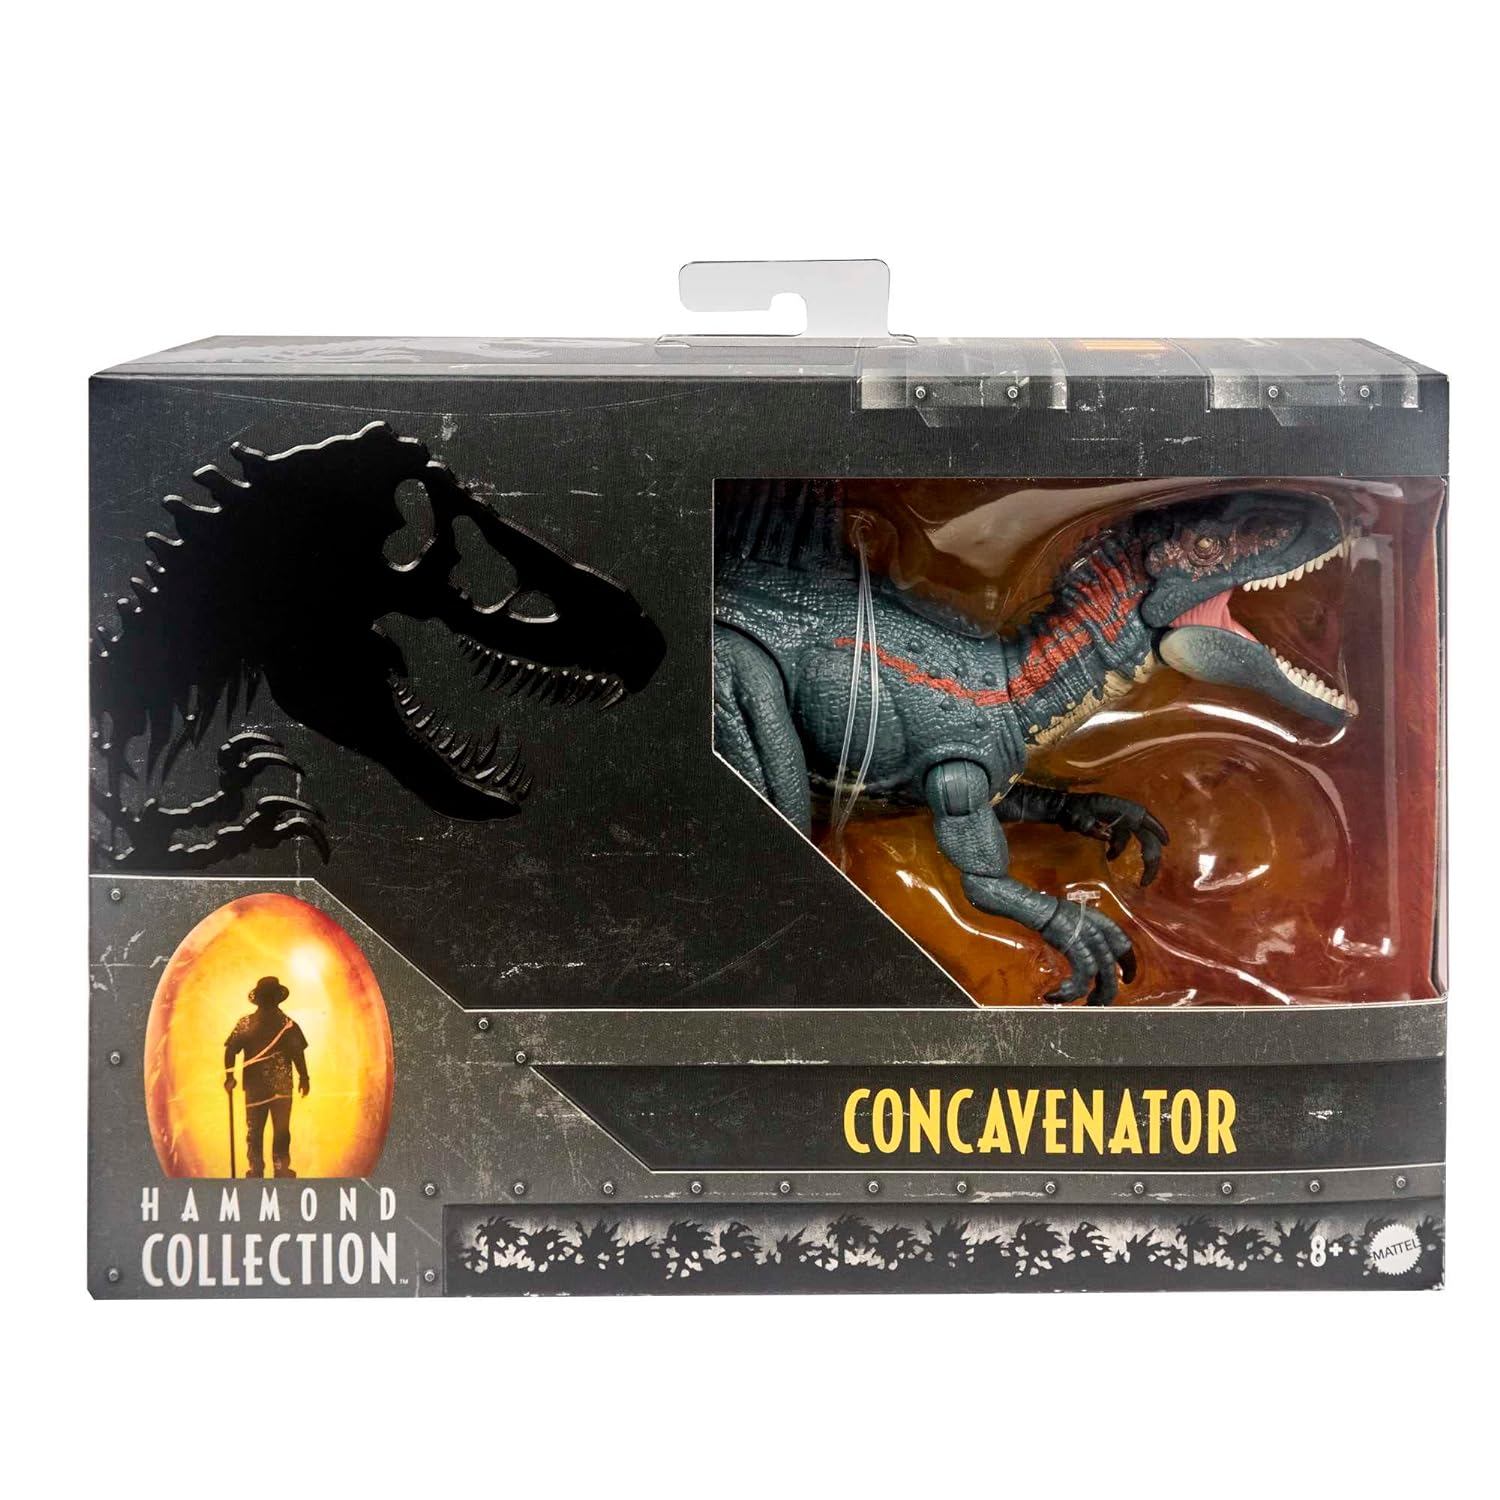 Jurassic World Hammond Collection Dinosaurs, Premium Look & Finishes, Medium Size Figures Approx 12 in Long with Approx 20 Articulations & Authentic Detail, Gift Ages 8 Years & Older